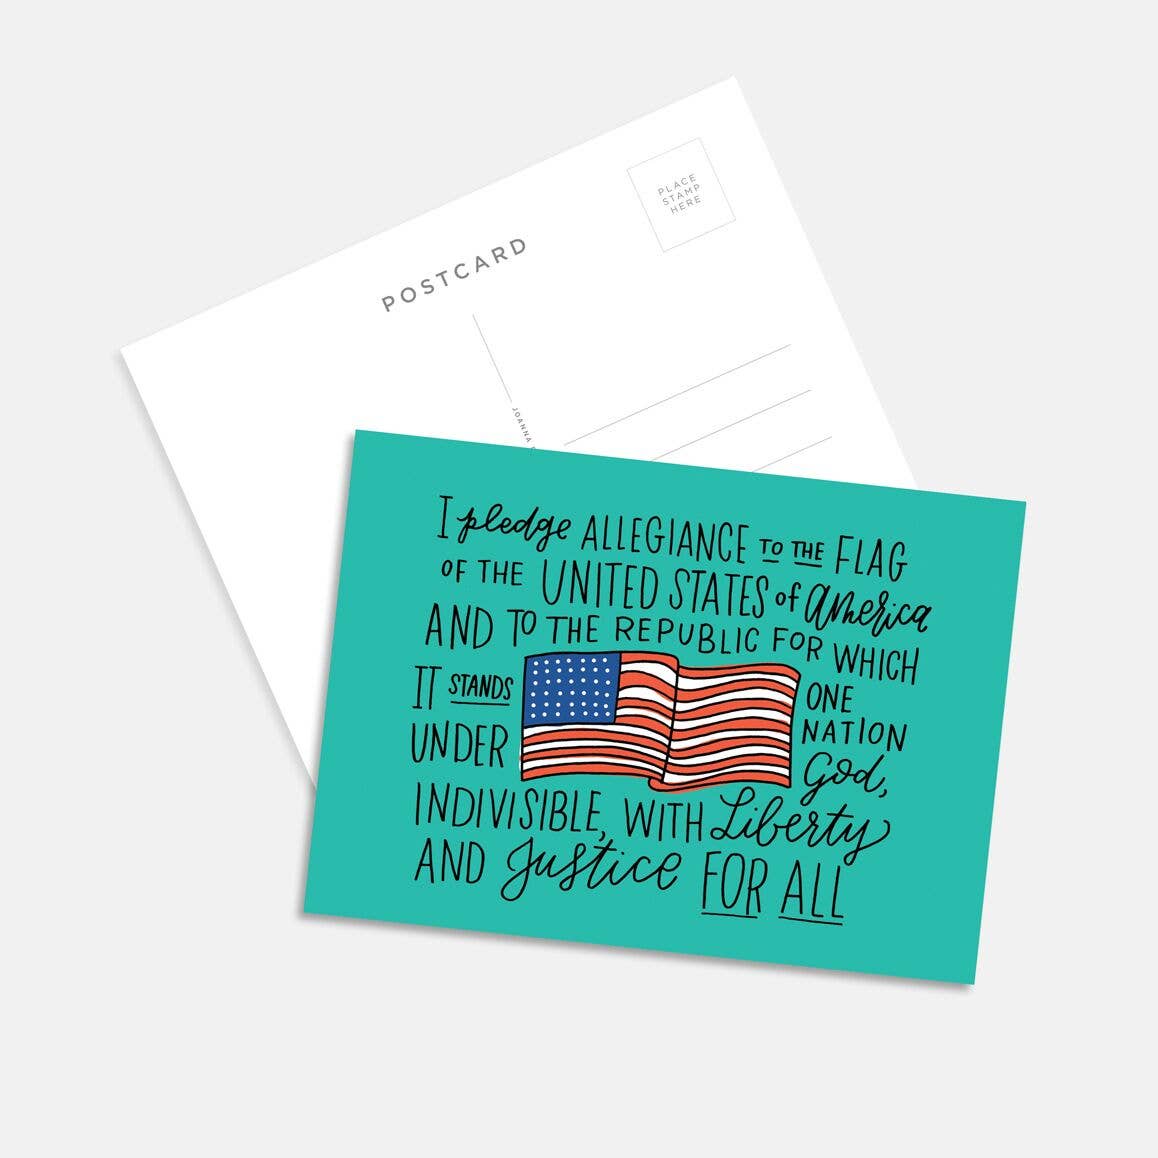 Front and back images of “Pledge of Allegiance” postcard.